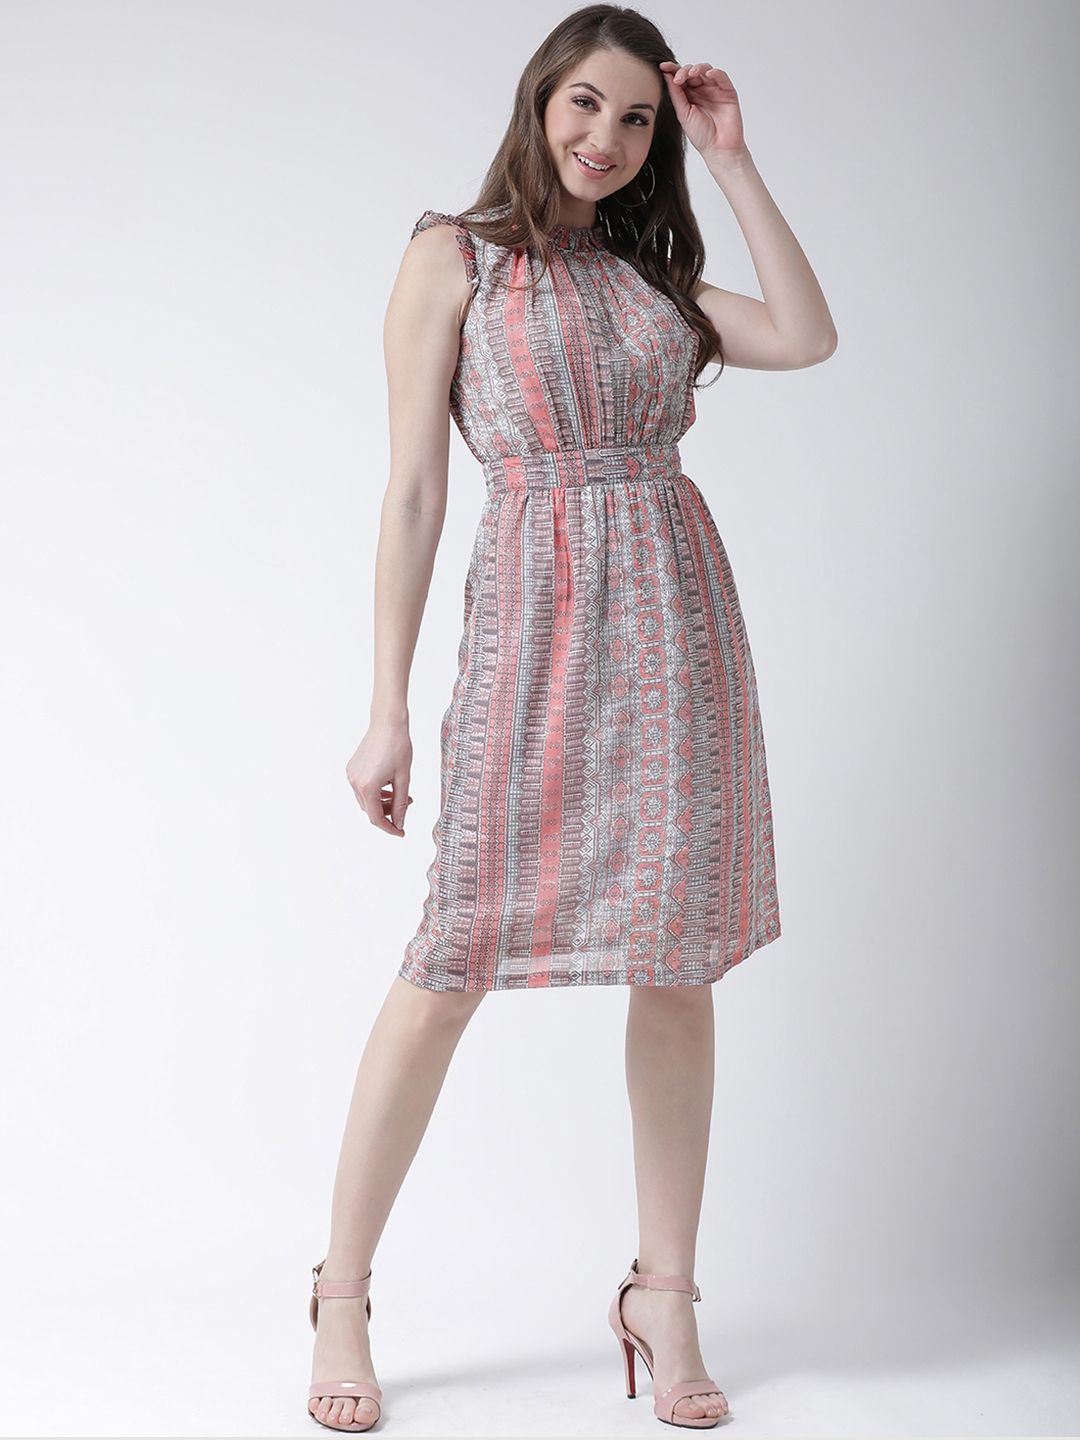 KASSUALLY Peach-Coloured & Grey Geometric Printed Fit and Flare Dress Price in India